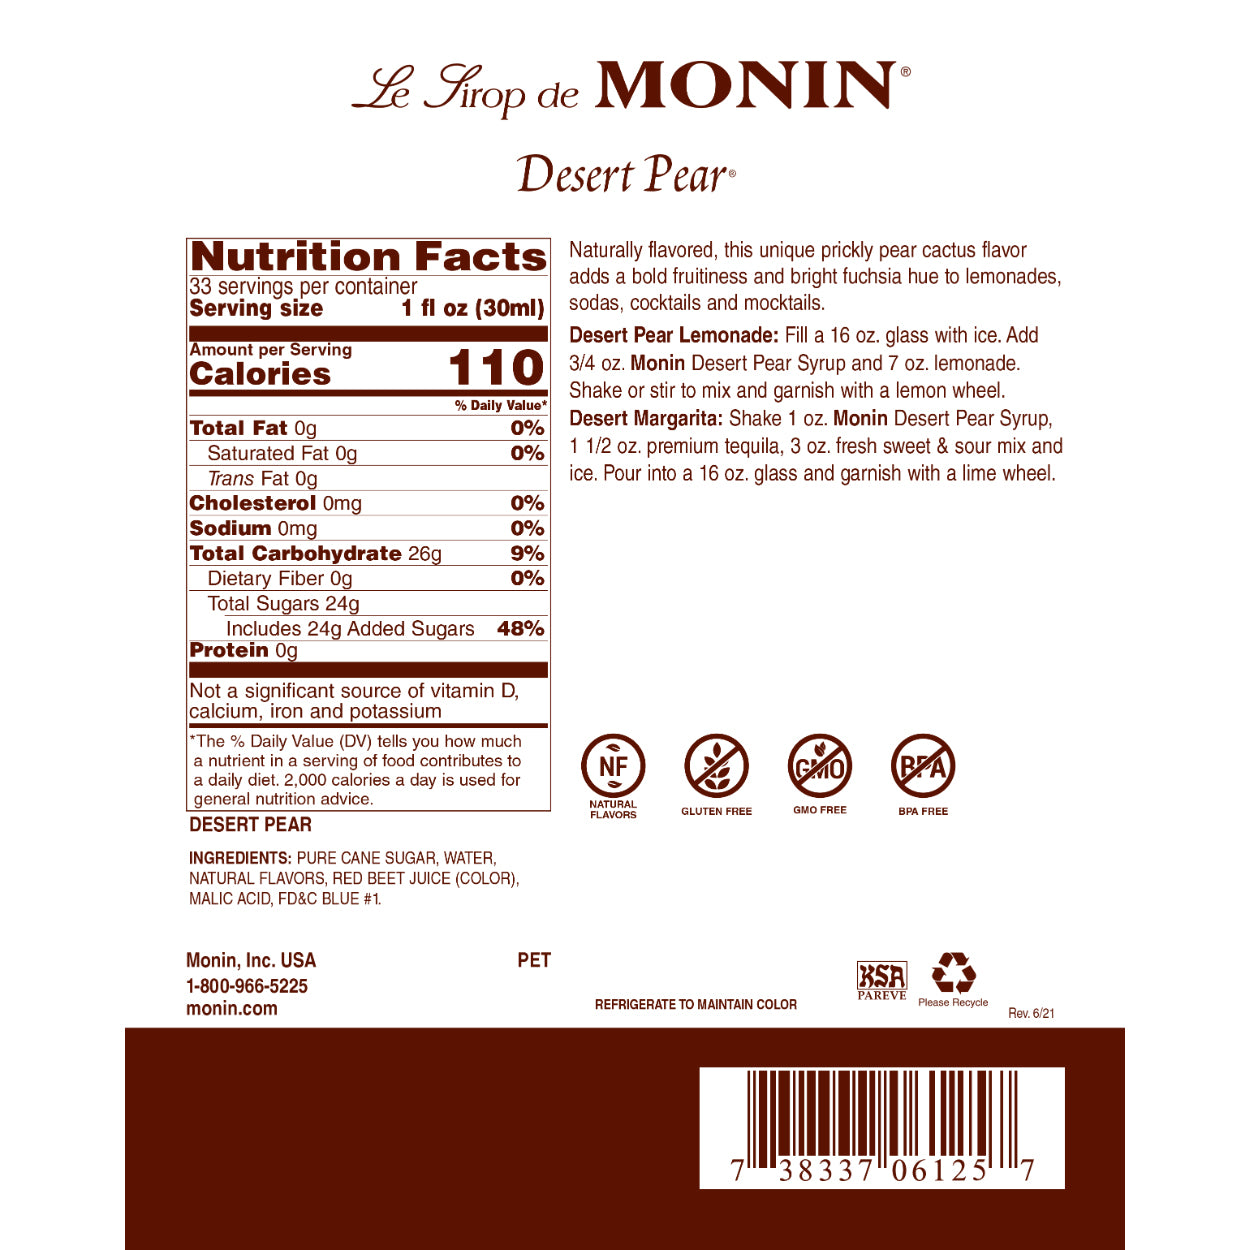 Monin Desert Pear Syrup nutrition facts and recipes label